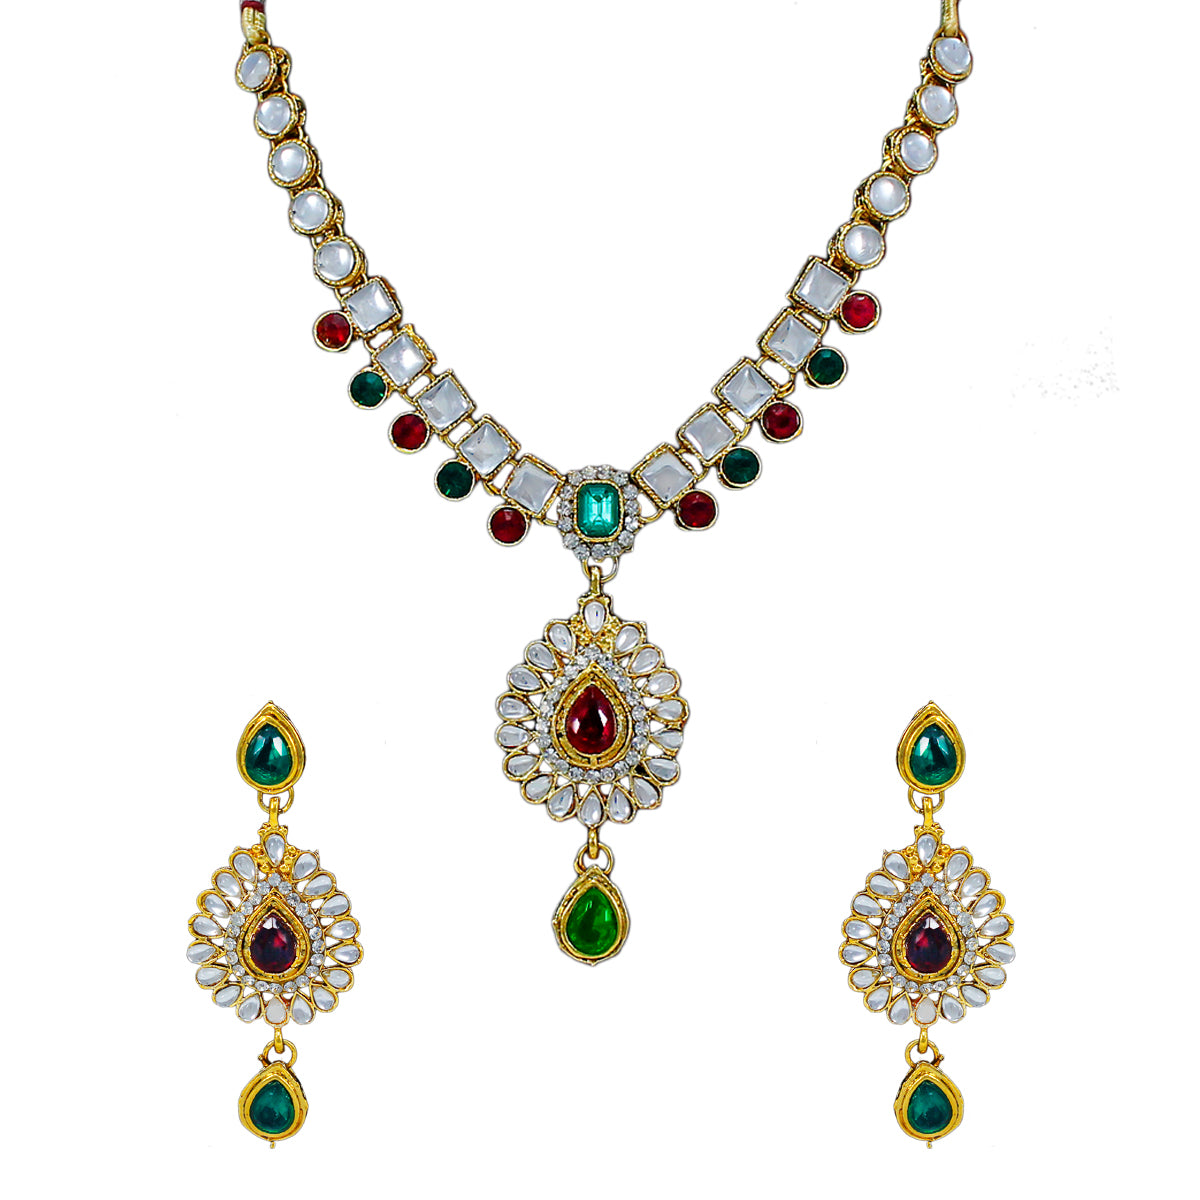 Royal Designer Leaf Design Necklace and Earrings with White Crystal Stones